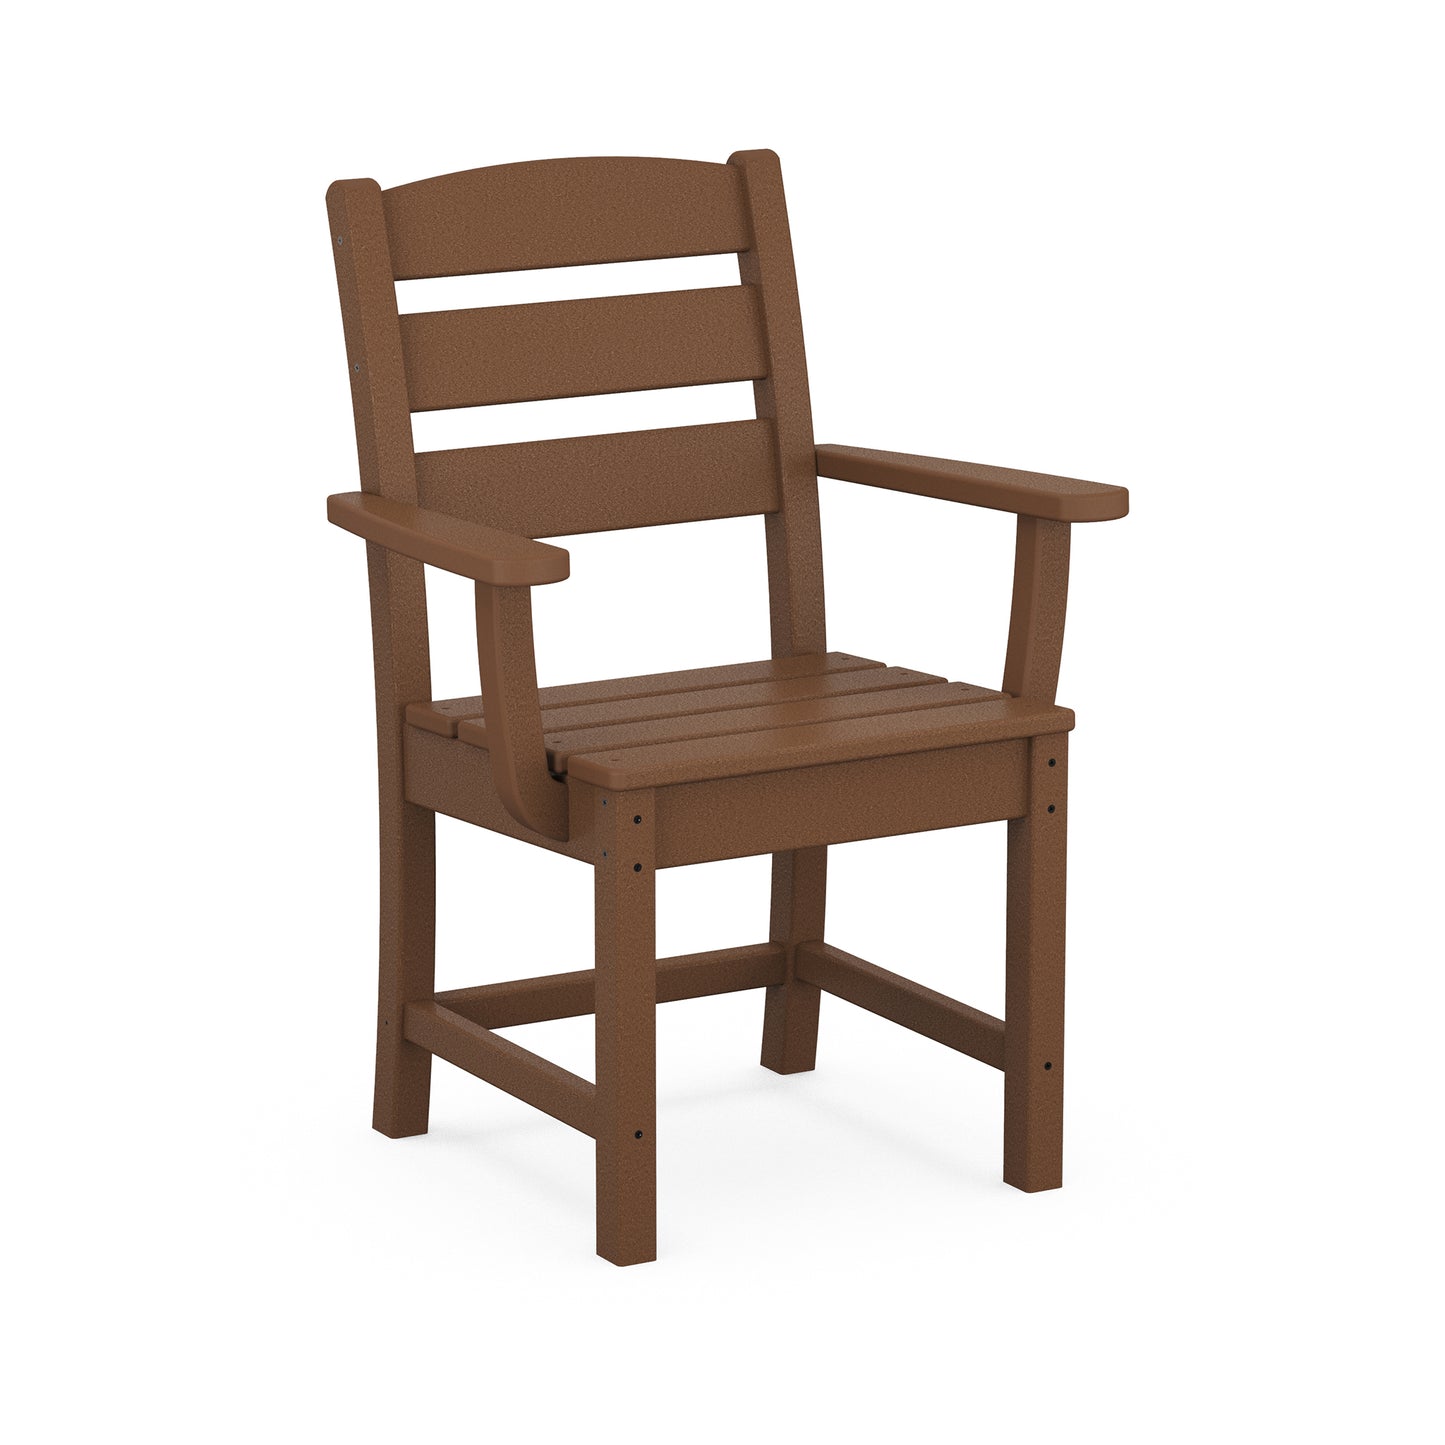 A brown POLYWOOD Lakeside Dining Arm Chair, featuring a high back and armrests, isolated on a white background.